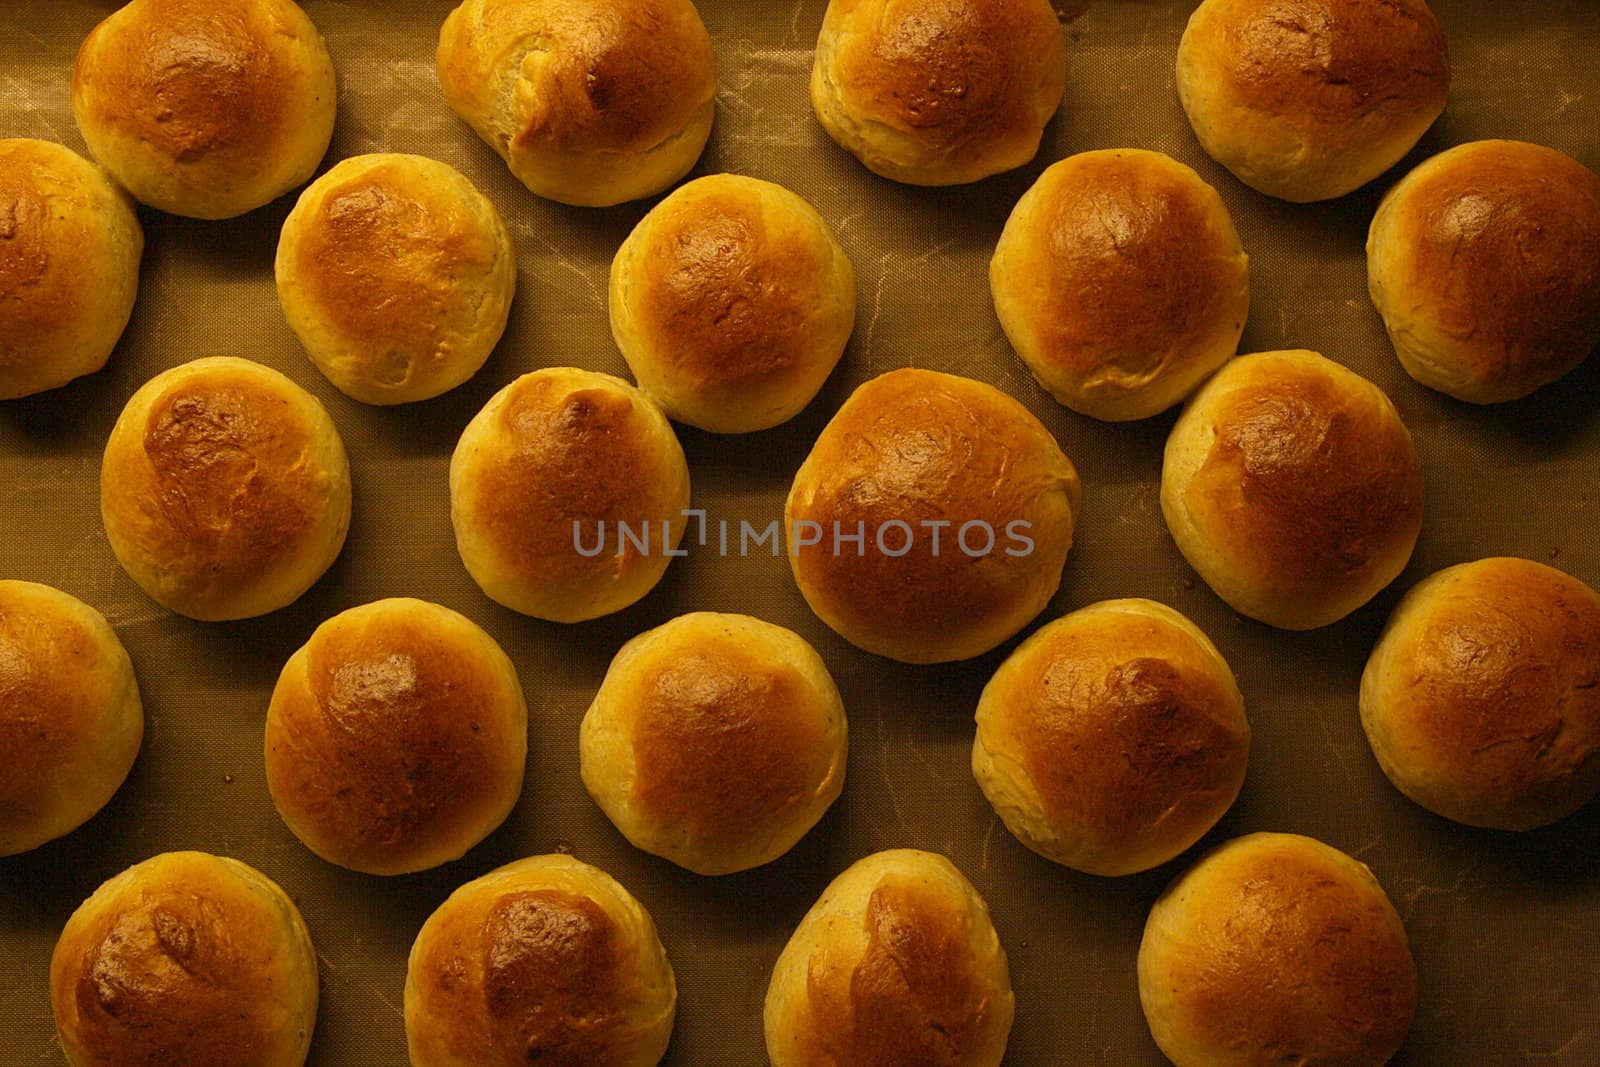 Golden wheat buns freshly baked, straight from the oven